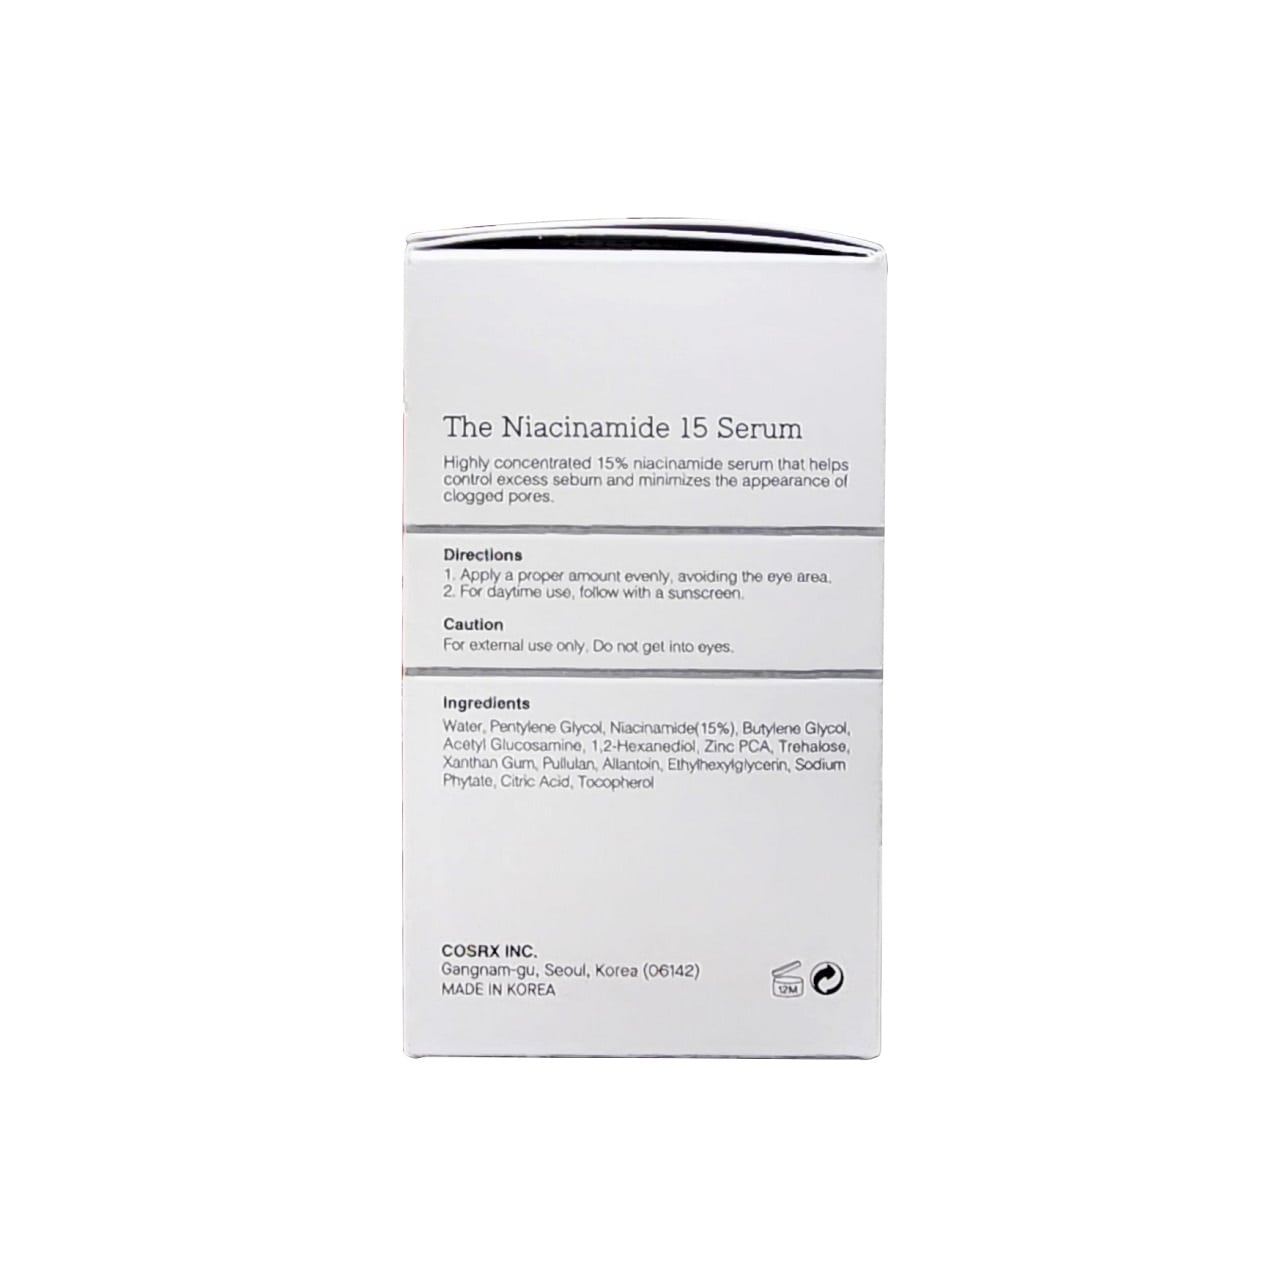 Description, direcitons, cautions, ingredients for COSRX The Niacinamide 15 Serum (20 grams) in English